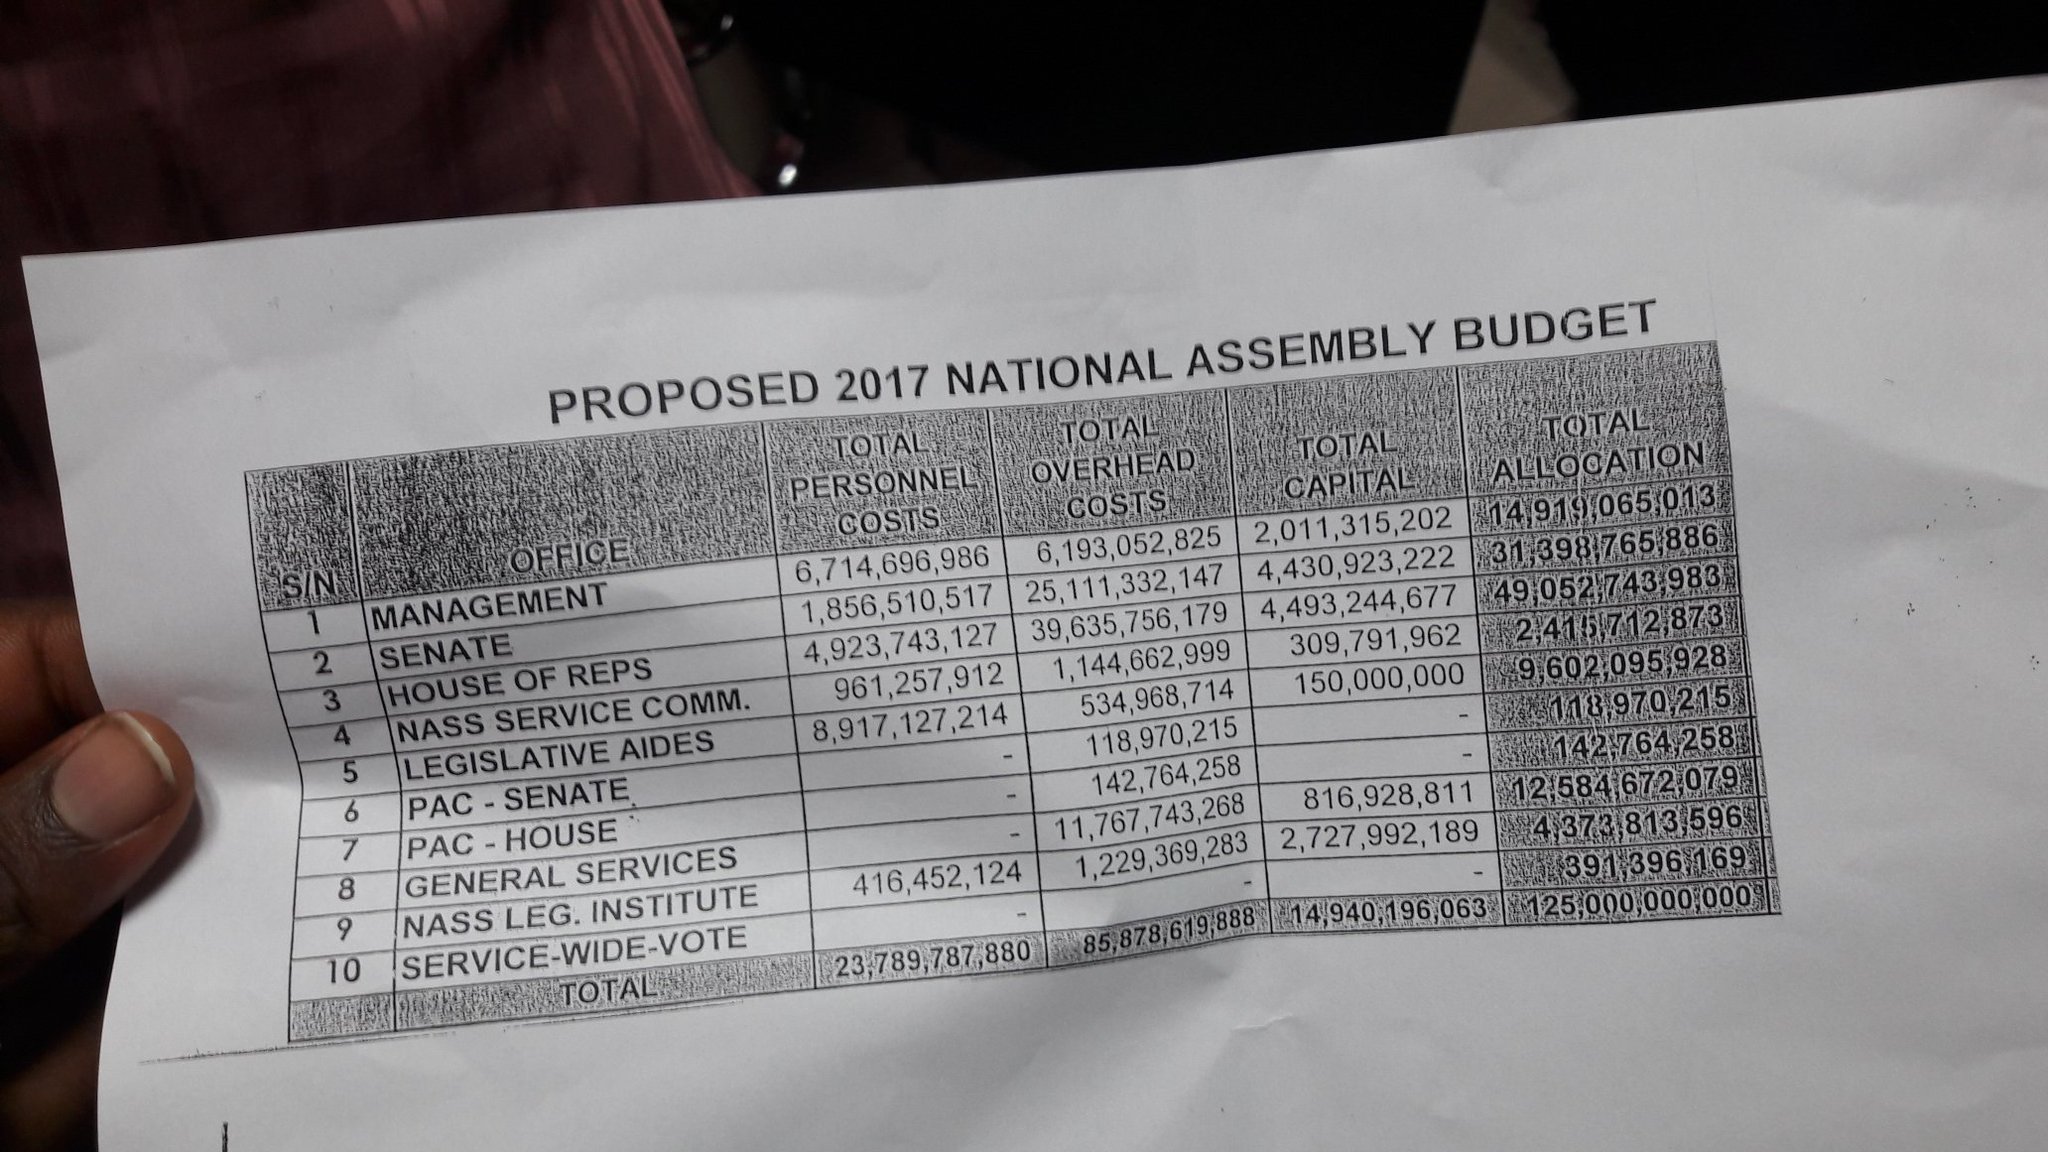 #OpenNASS: National Assembly Opens Its Budget For The First Time In History